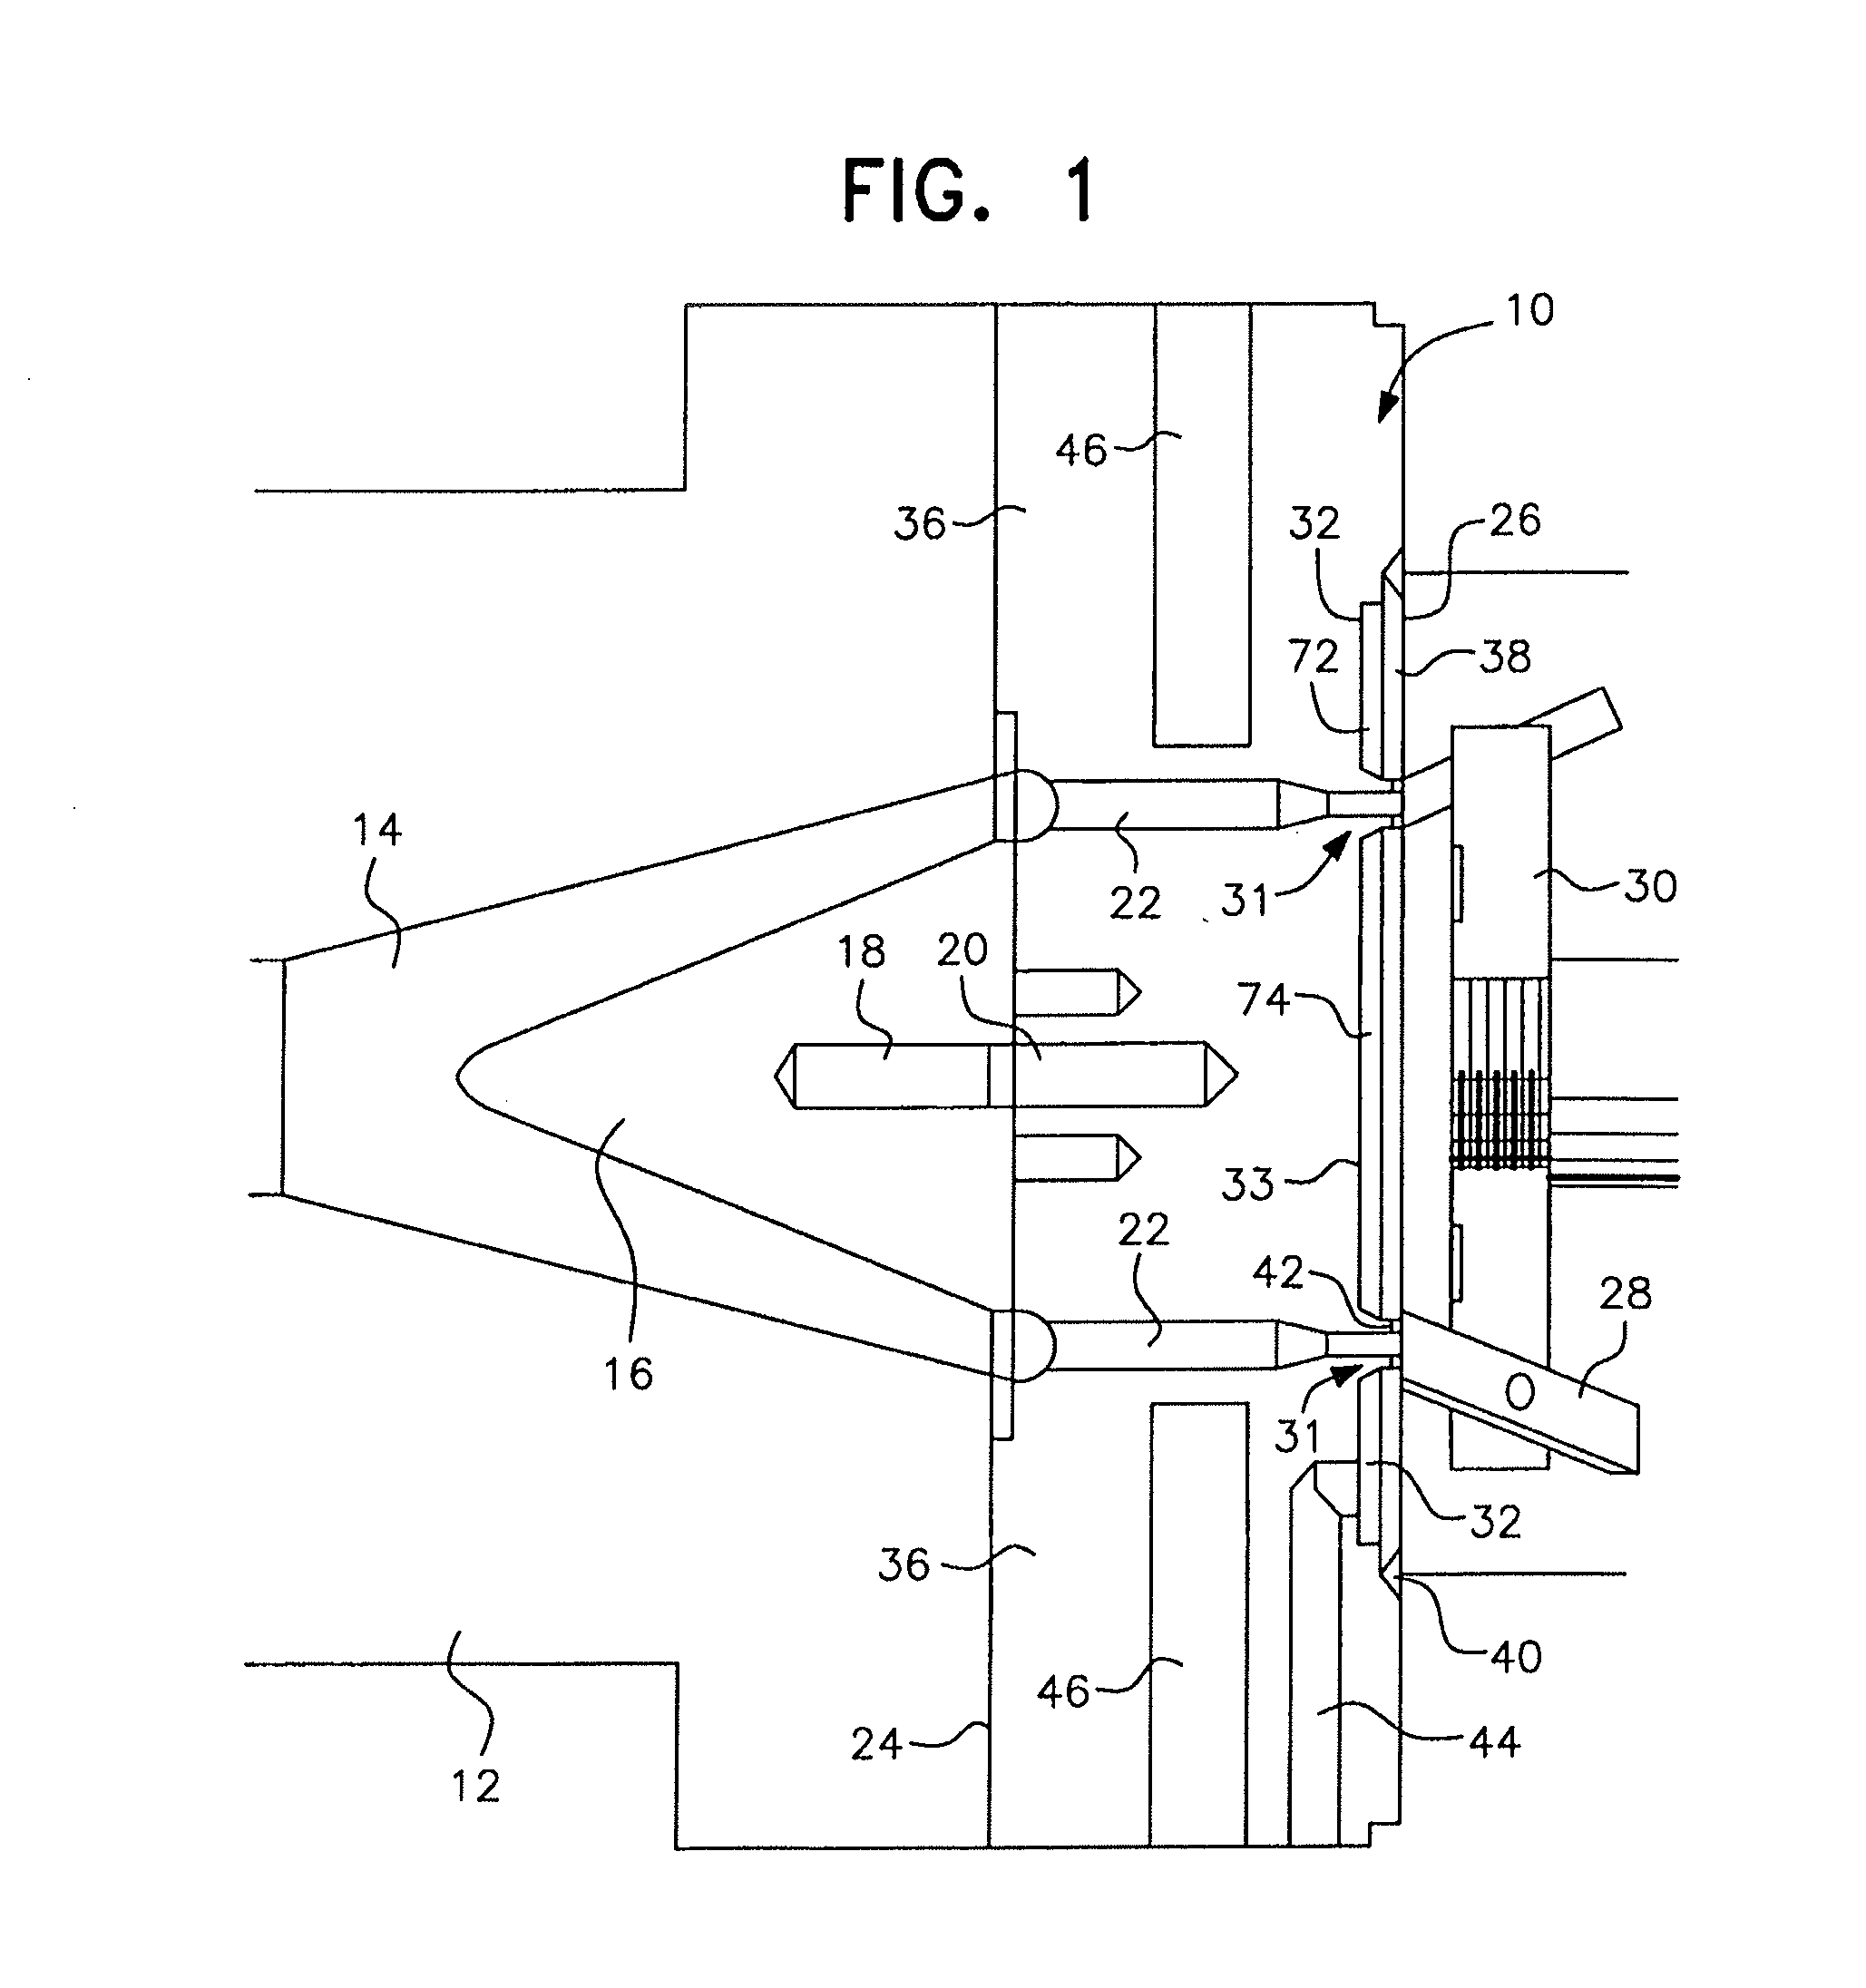 Thermally insulated die plate assembly for underwater pelletizing and the like